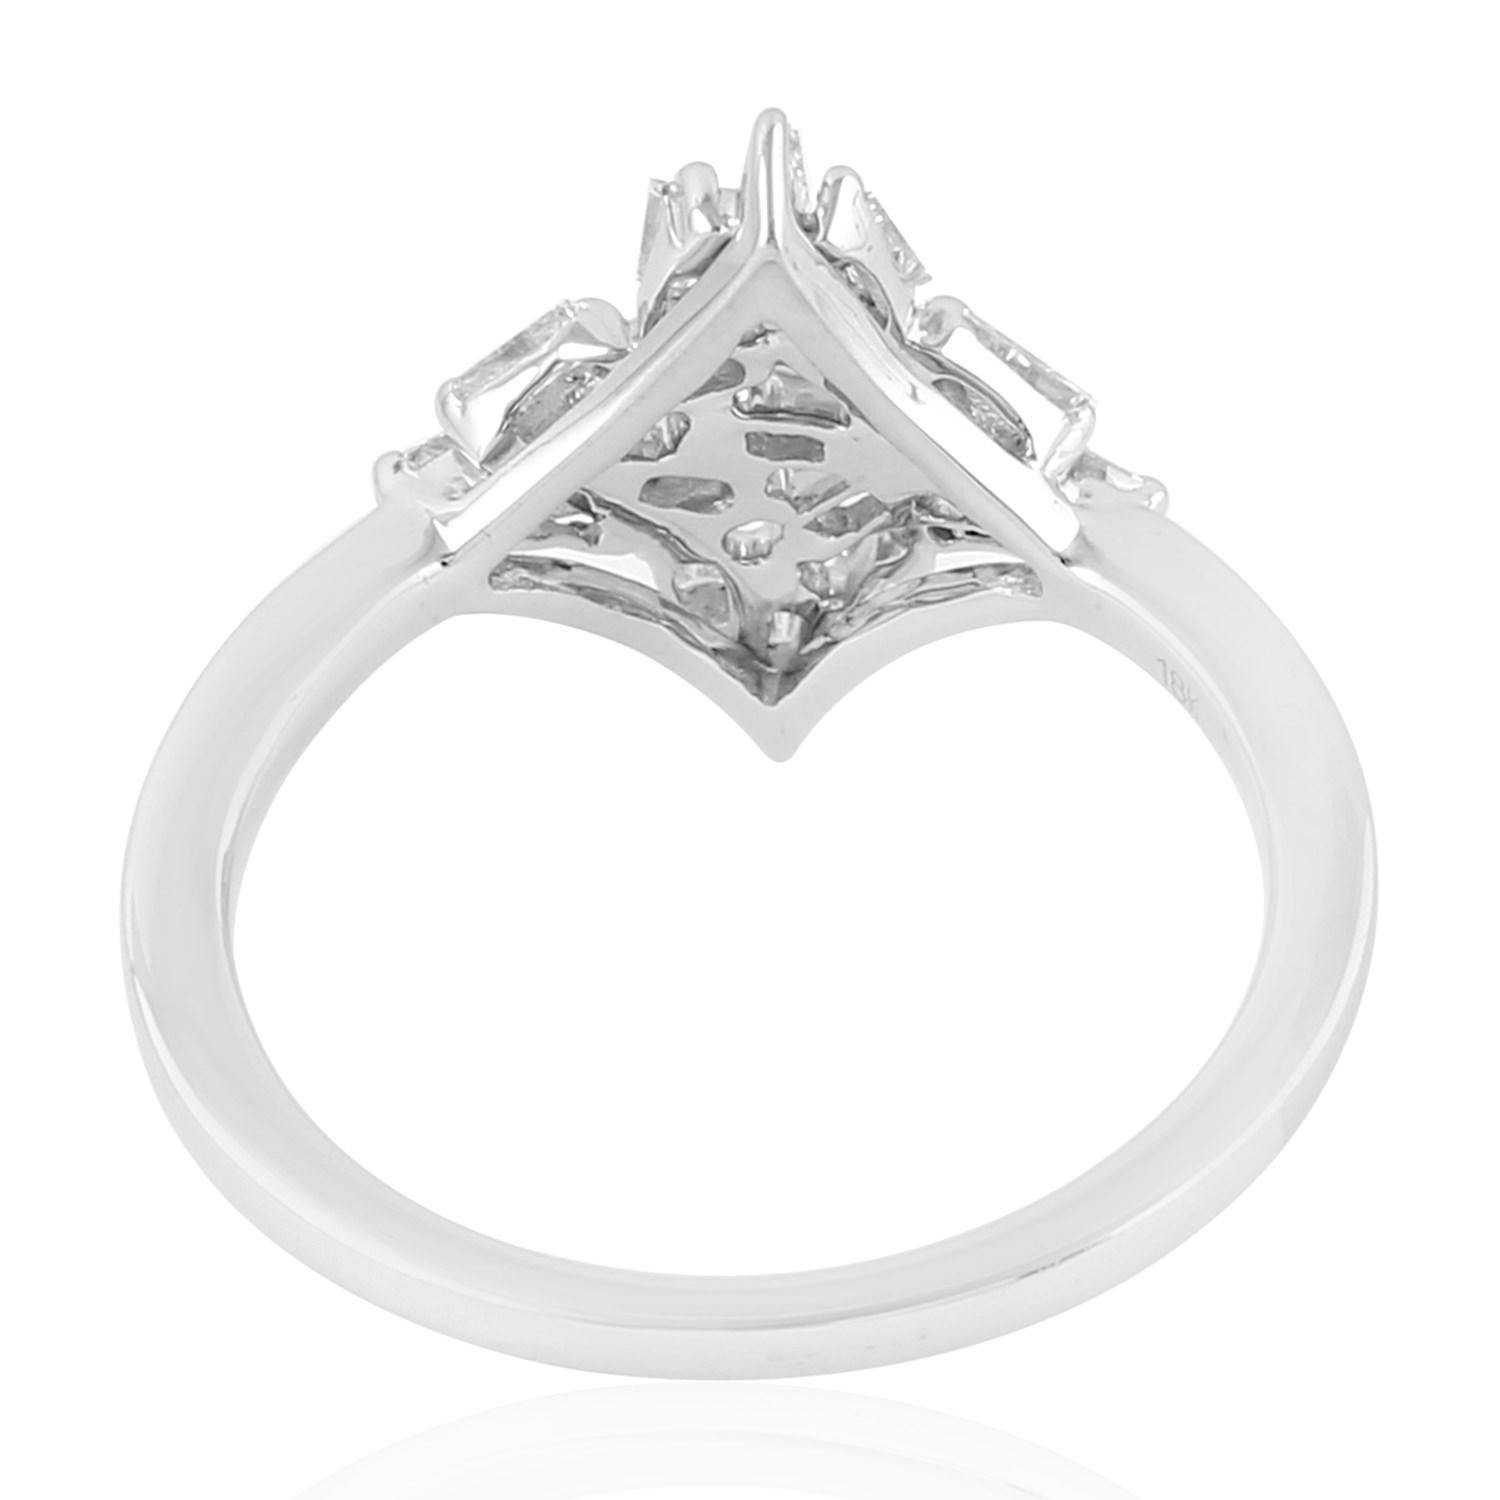 Star Shaped Baguette Diamond Ring Made In 18k White Gold In New Condition For Sale In New York, NY